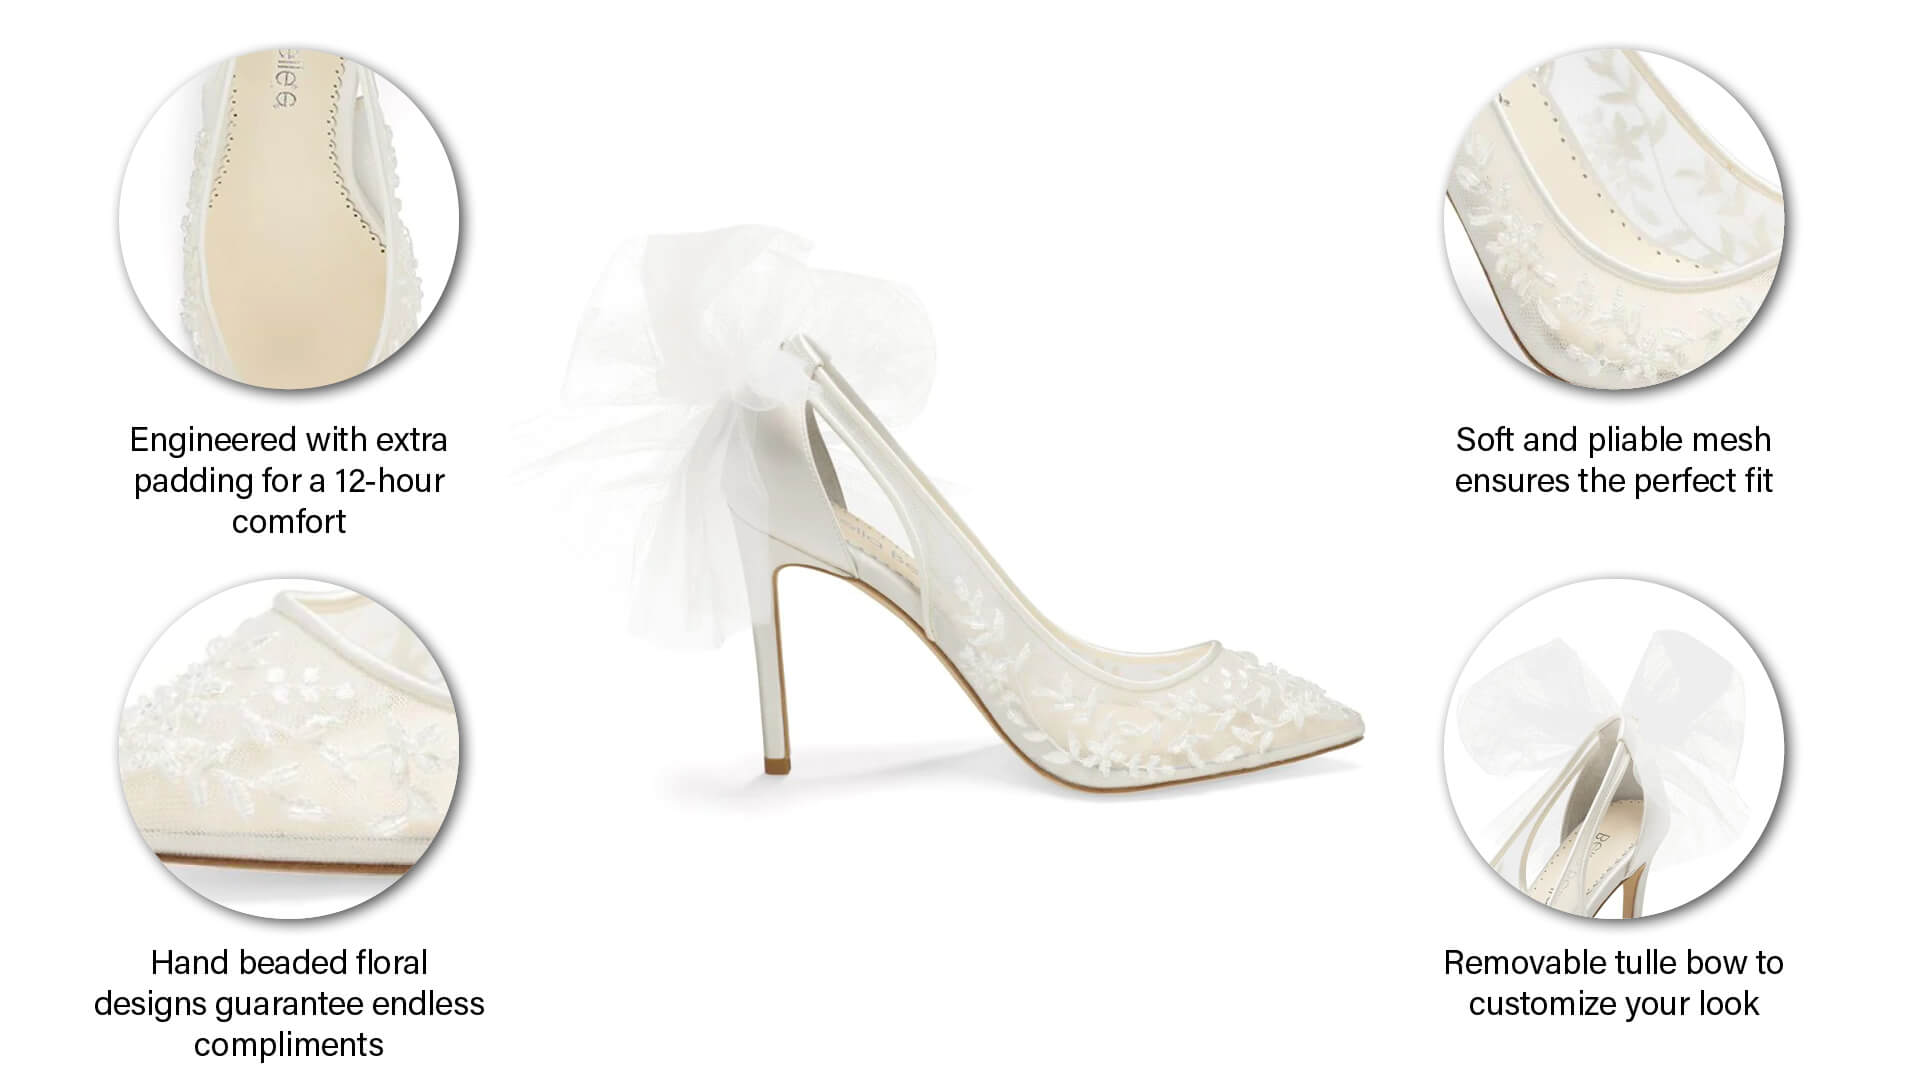 High Heel Lace Beaded Wedding Shoes with Removable Bow